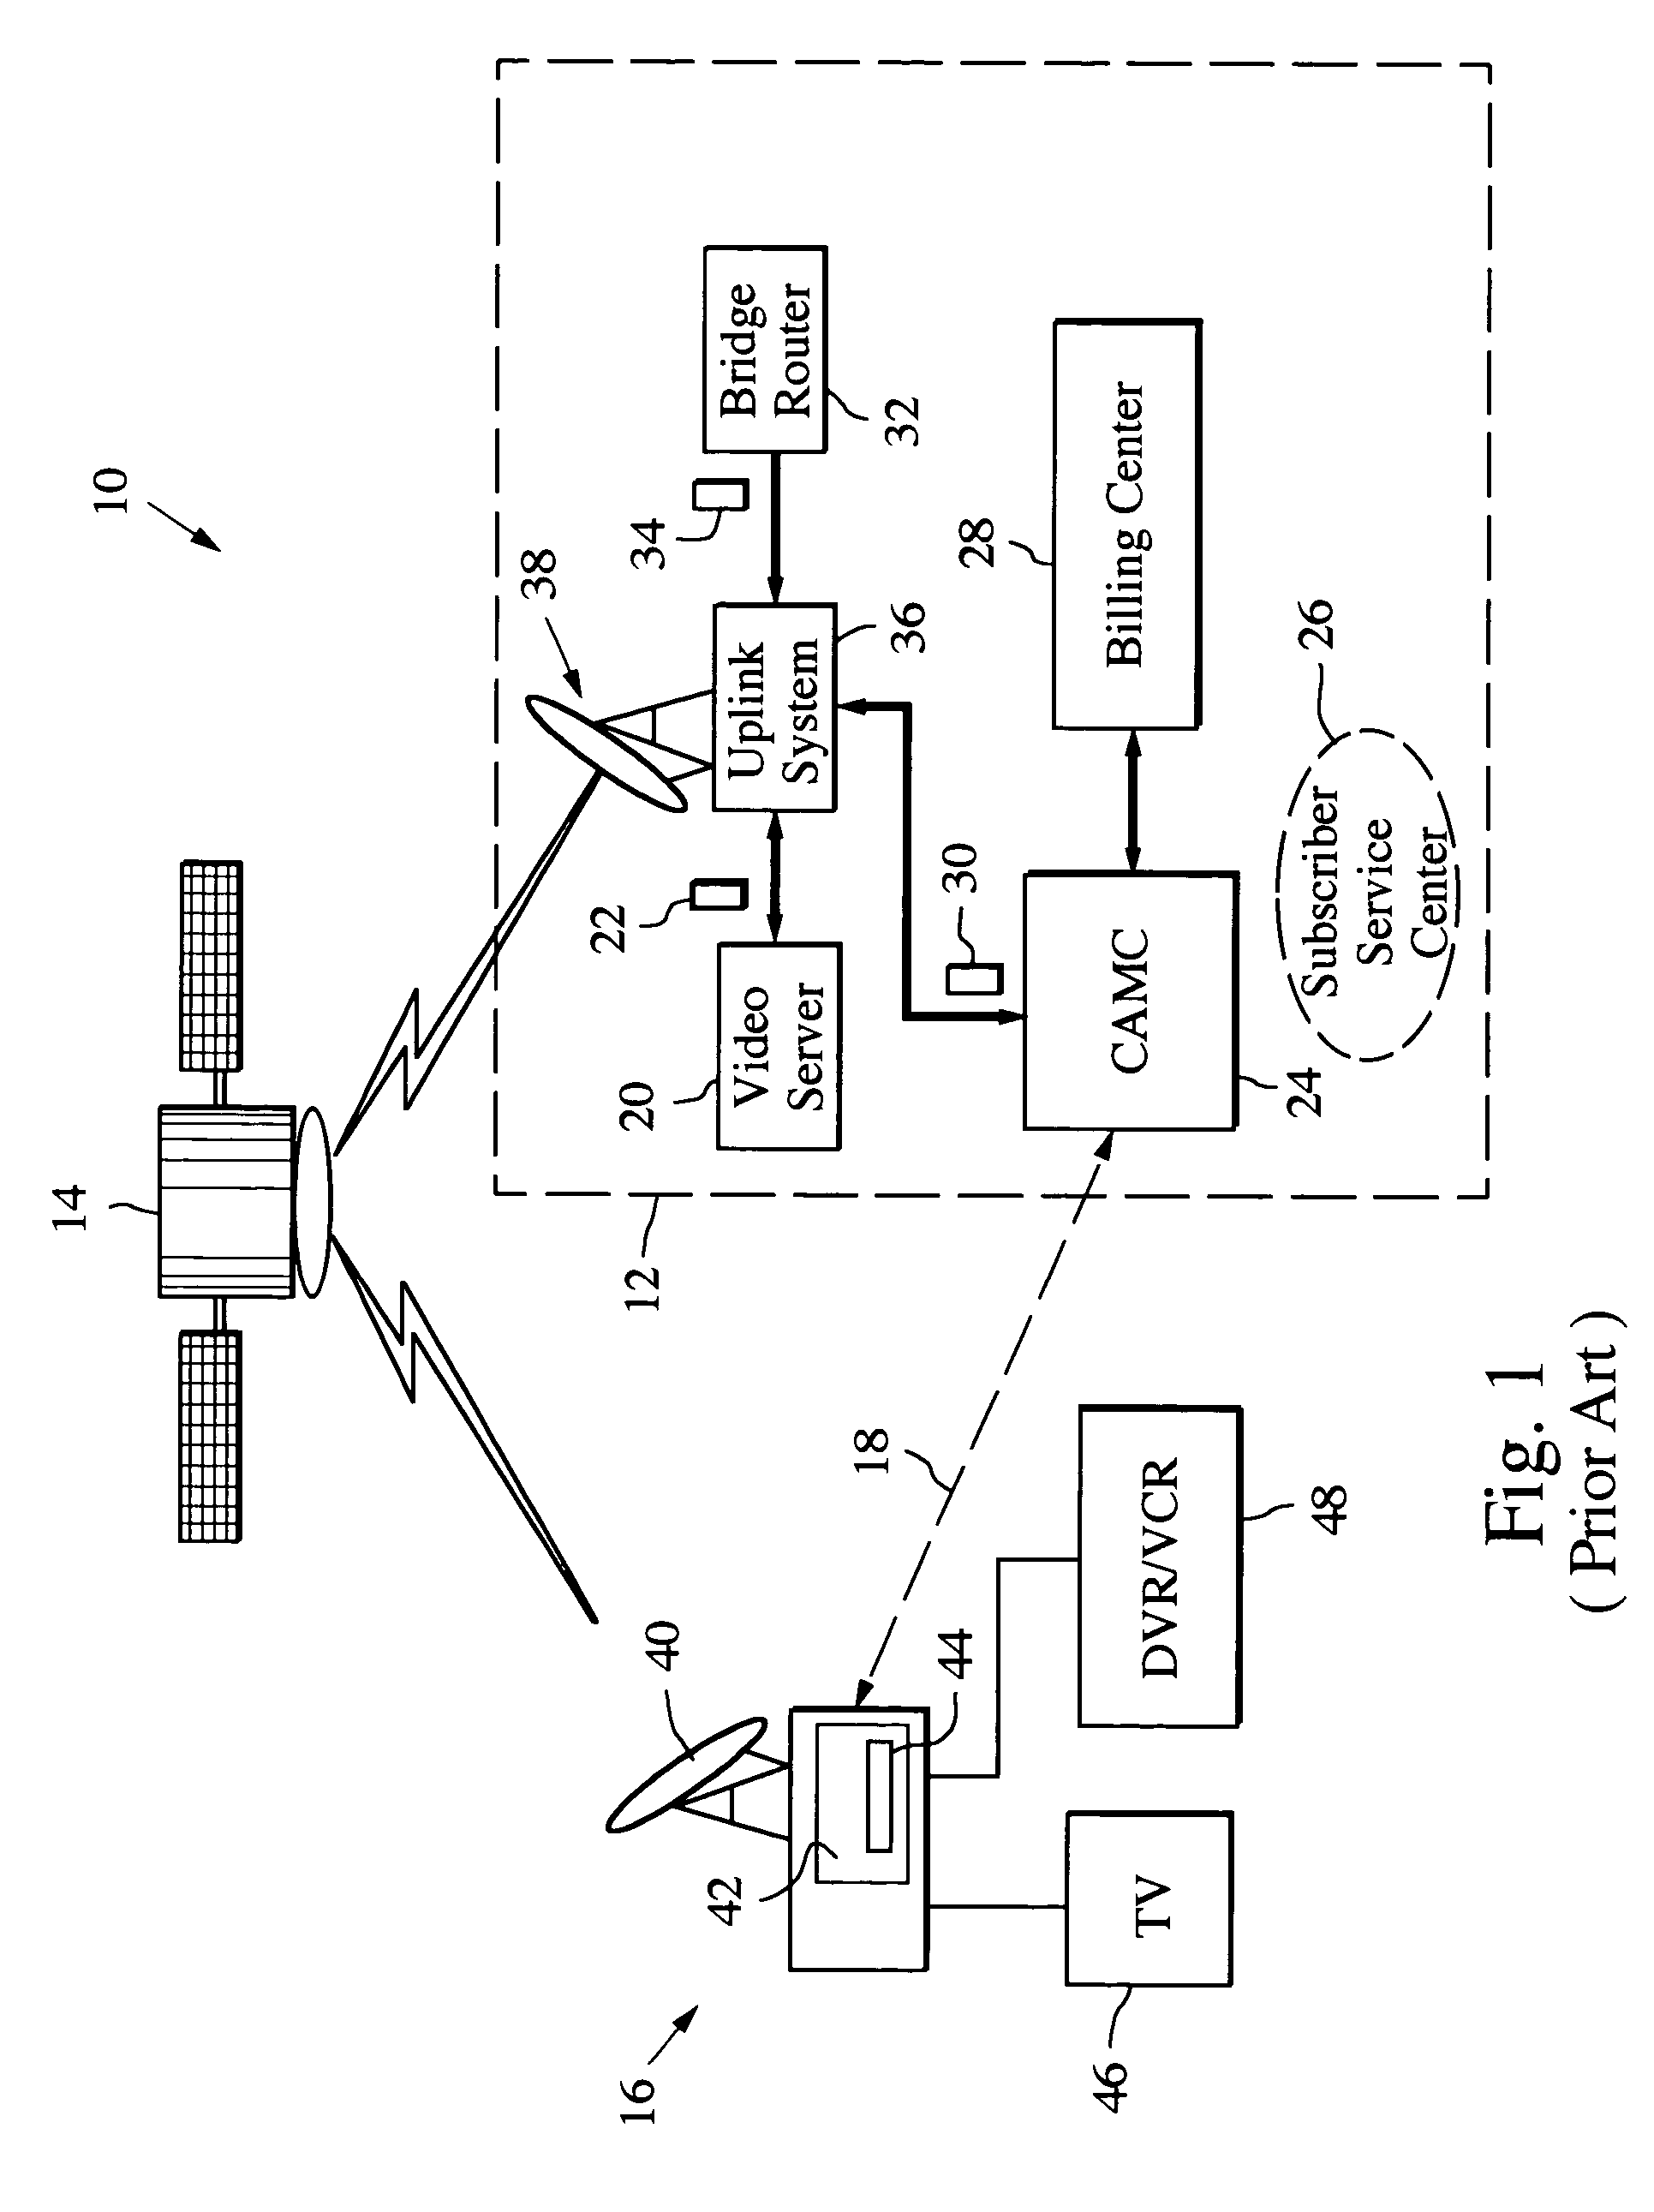 Satellite television network and real-time method for downloading and verifying a subscriber remote record request